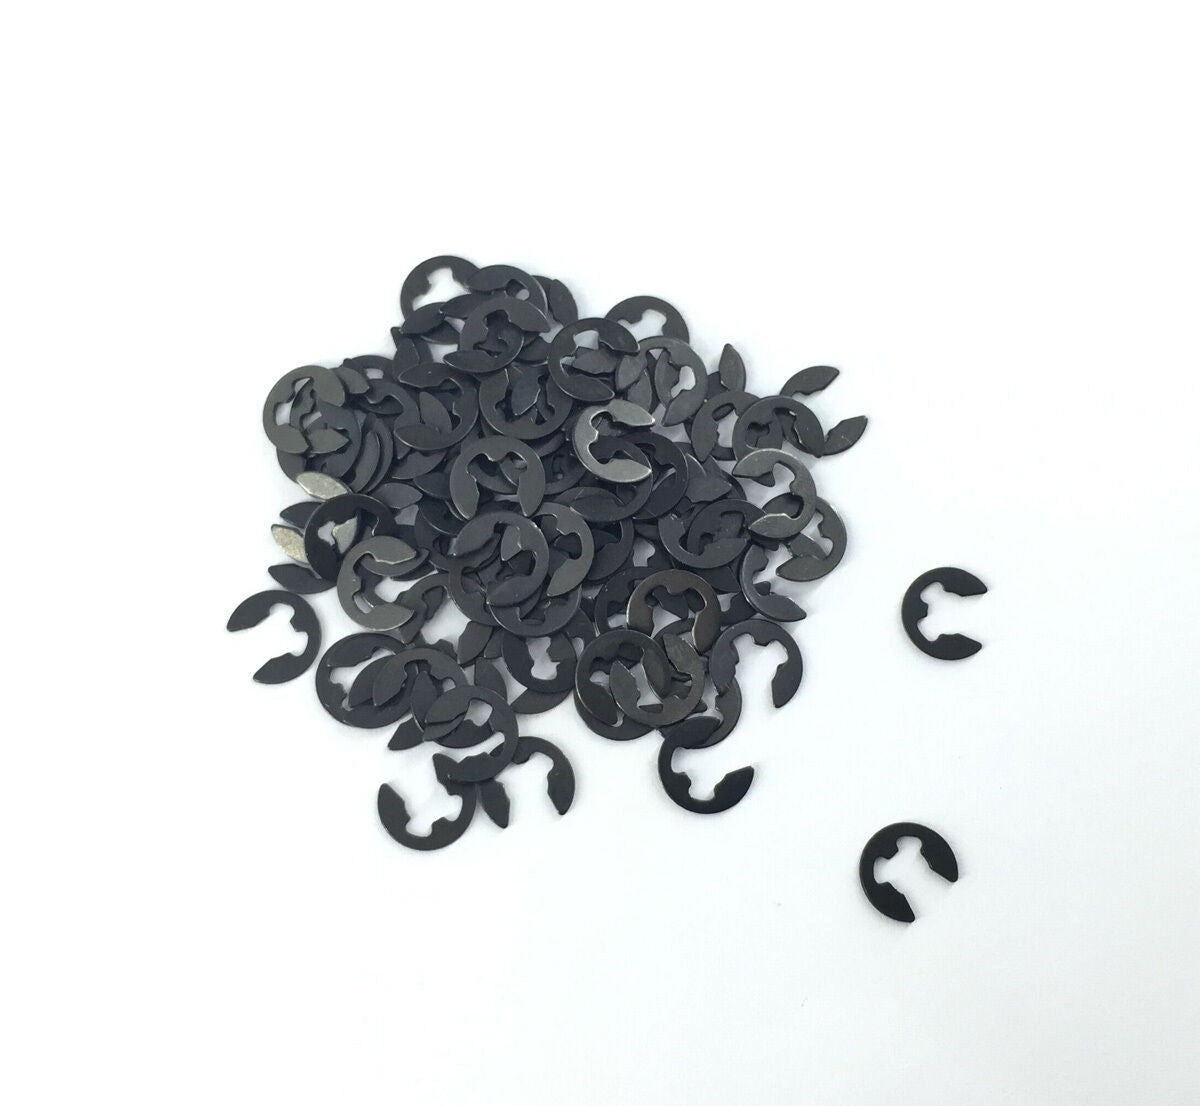 100pcs Stainless Steel 4mm E-Clip / Snap Ring / Circlip [M_M_S]